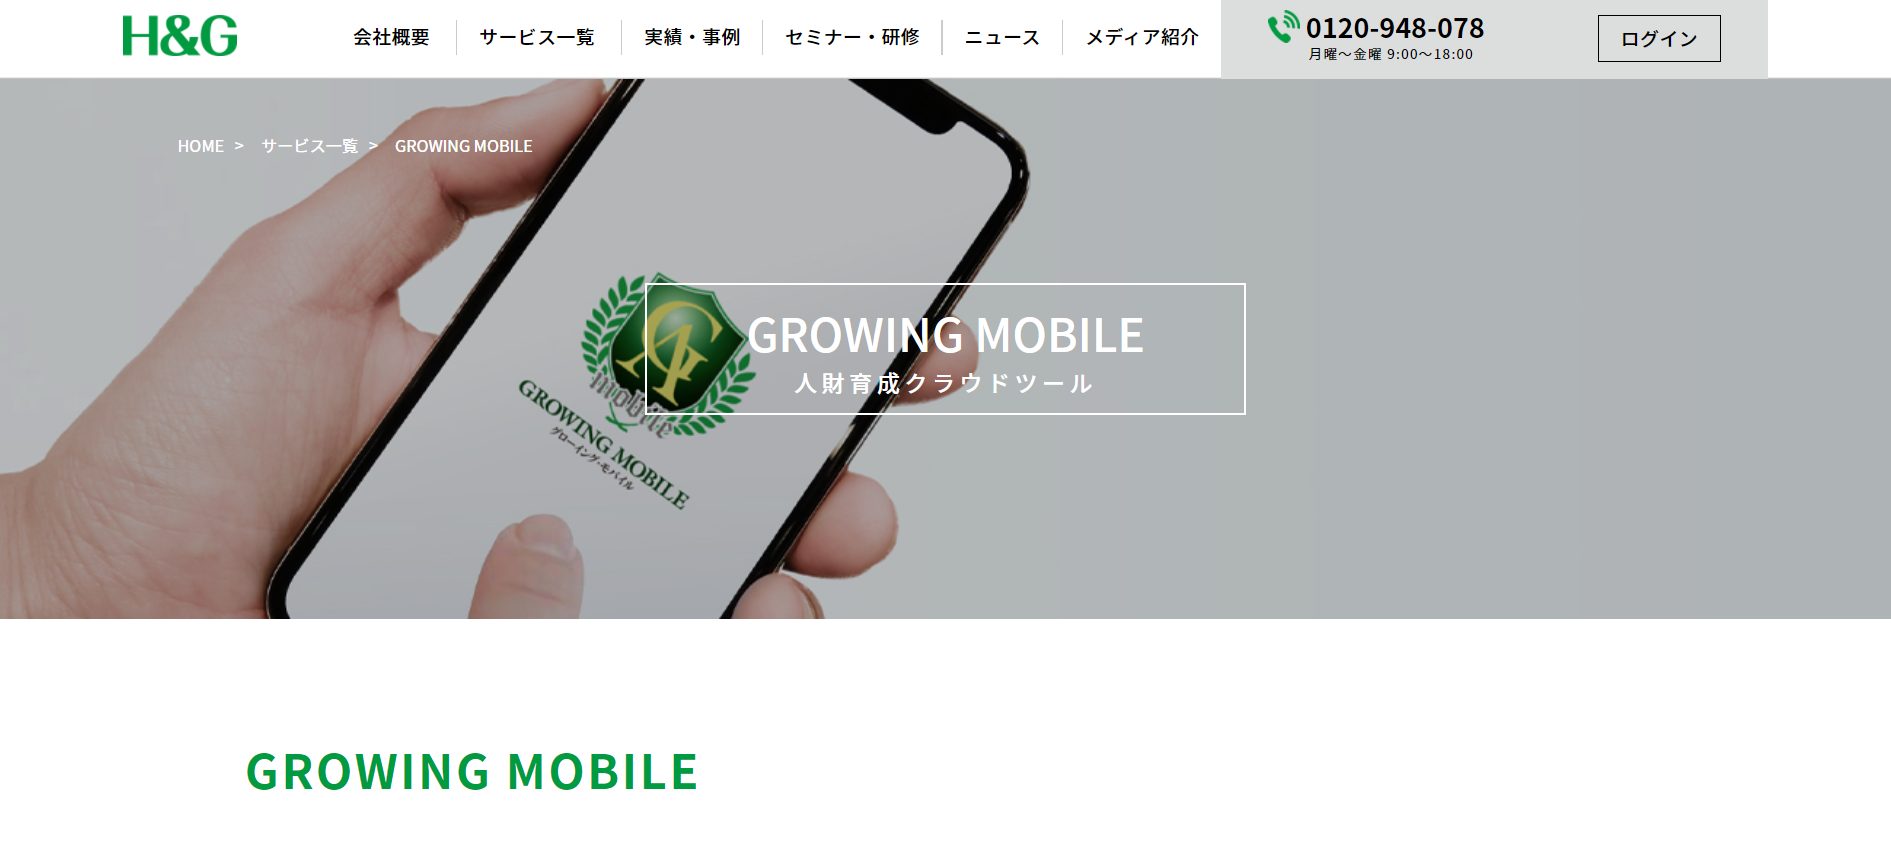 GROWING MOBILEの公式ページ